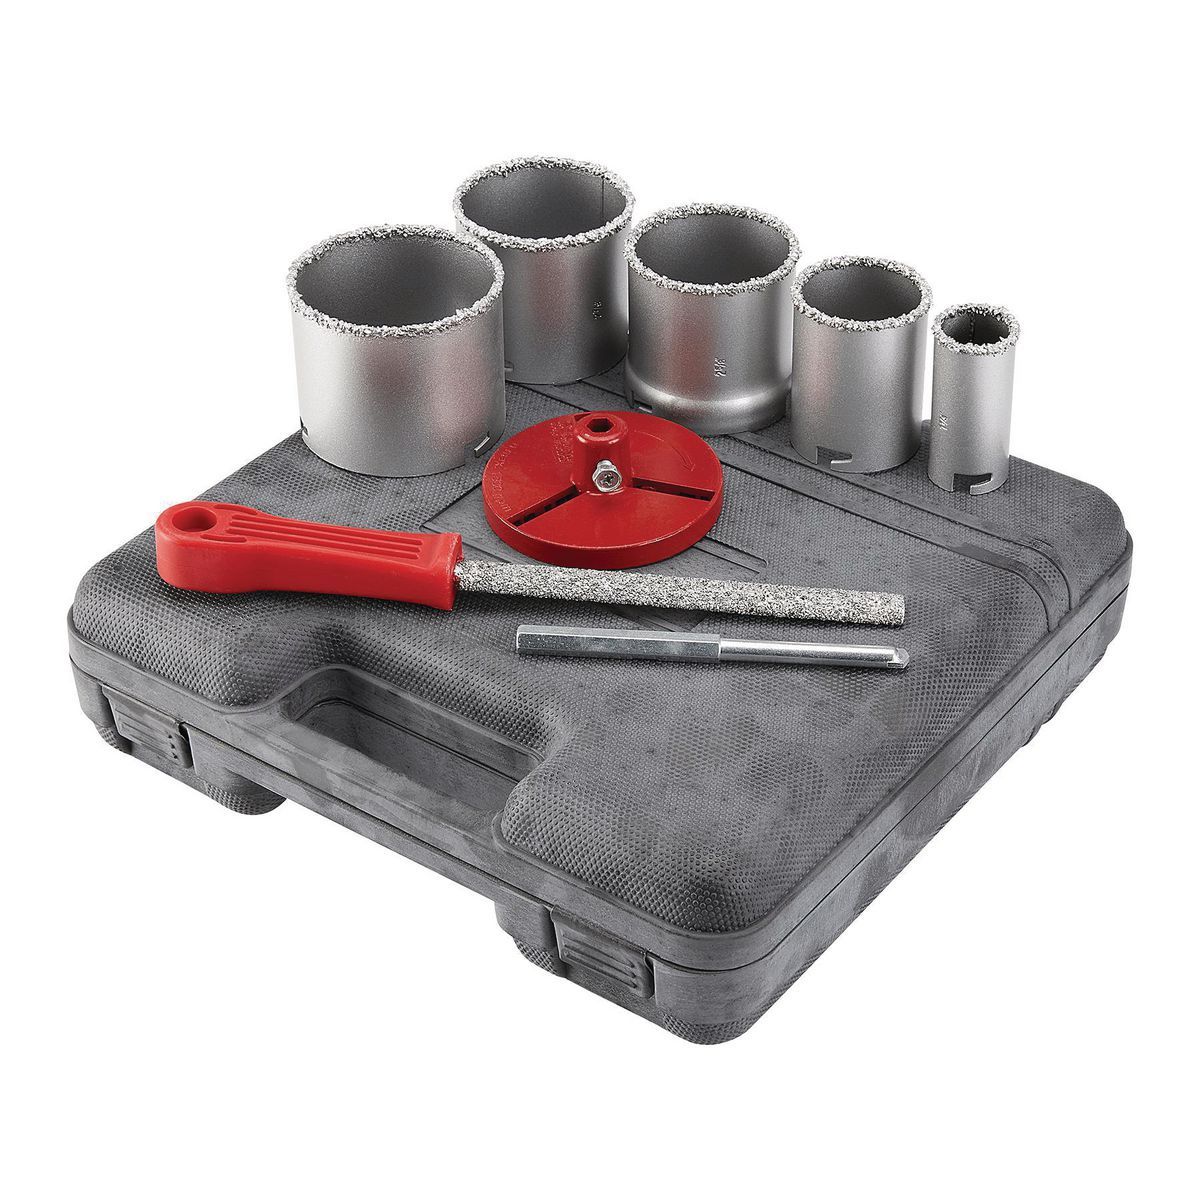 WARRIOR 1-1/4 In. - 3-1/4 In. Carbide Grit Hole Saw Assorted Set, 9 Piece